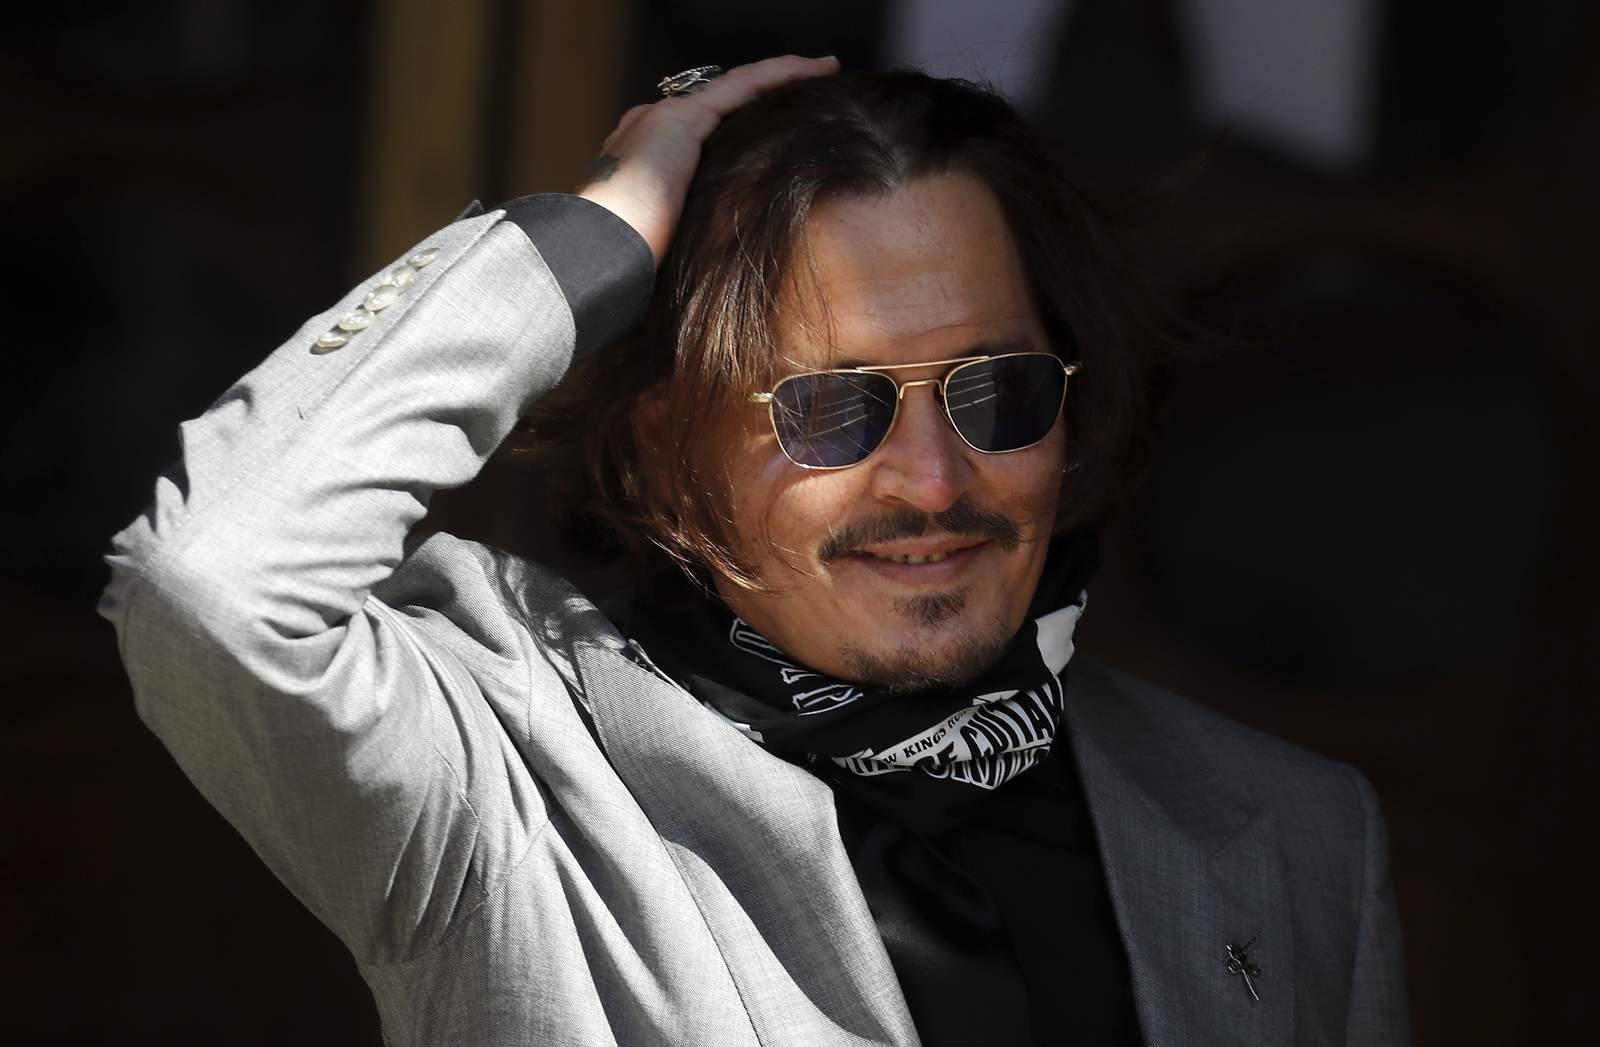 Ruling due in Depp's high-stakes libel suit against tabloid